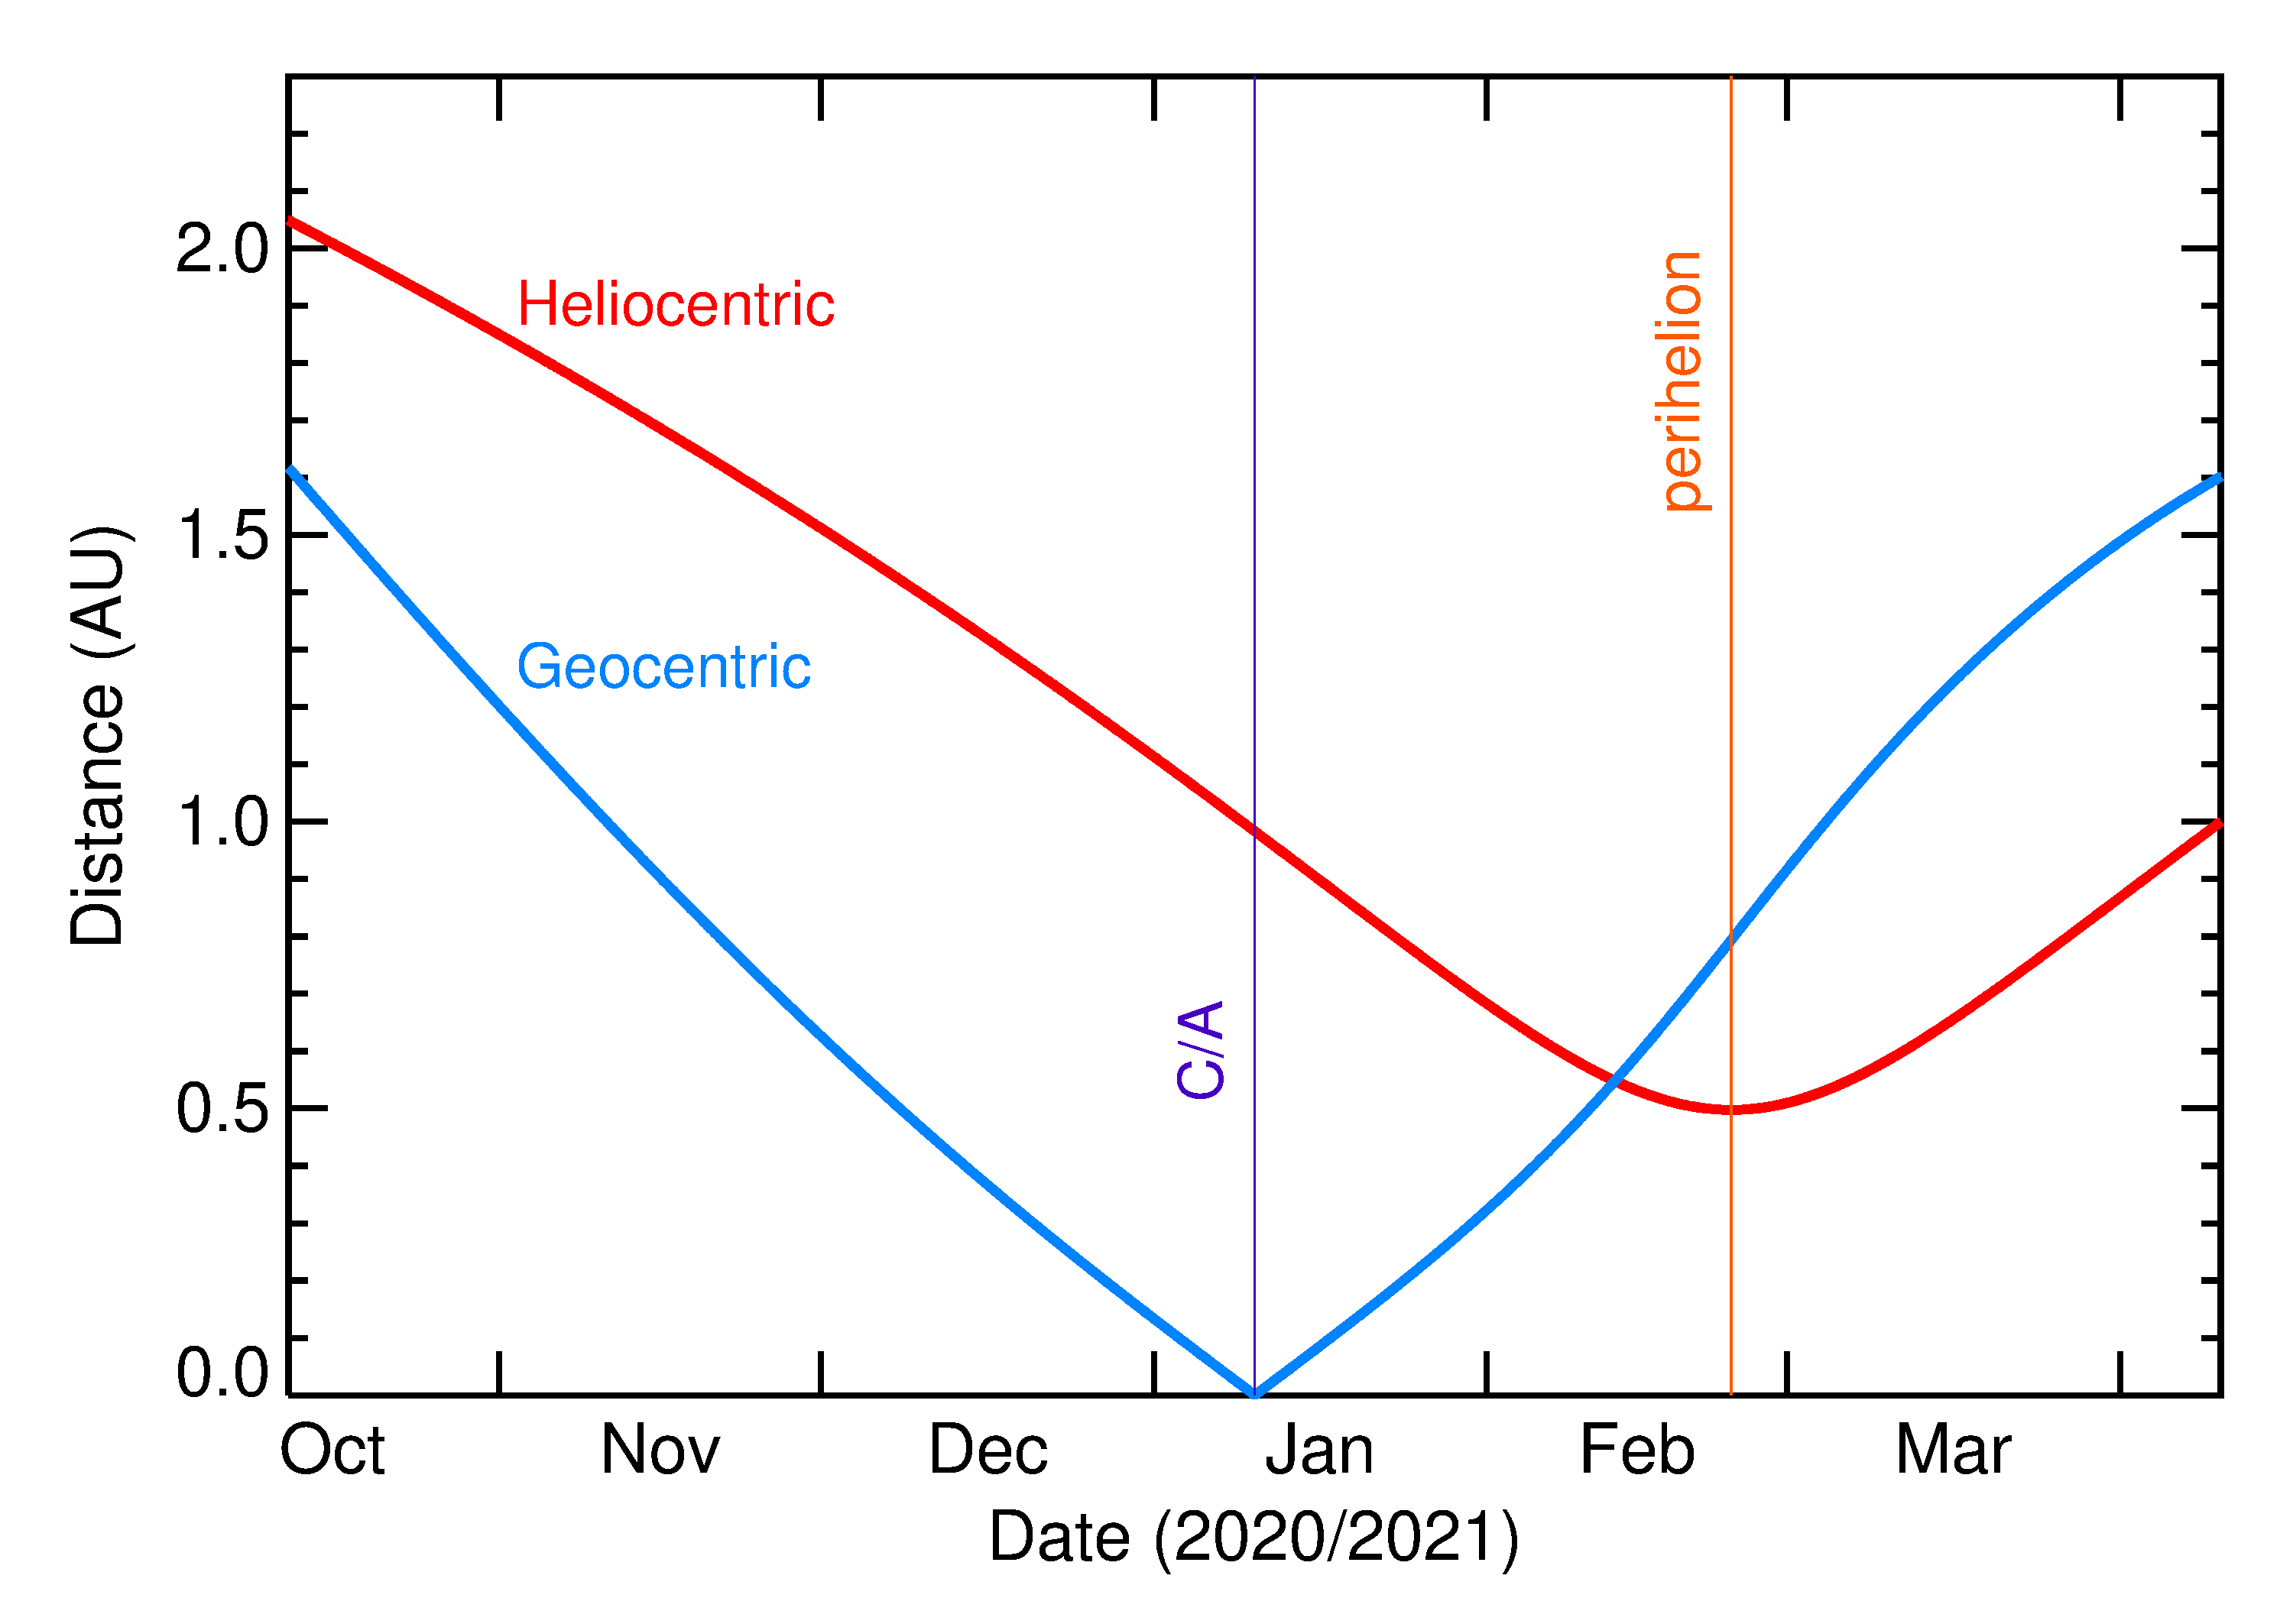 Heliocentric and Geocentric Distances of 2021 AS2 in the months around closest approach